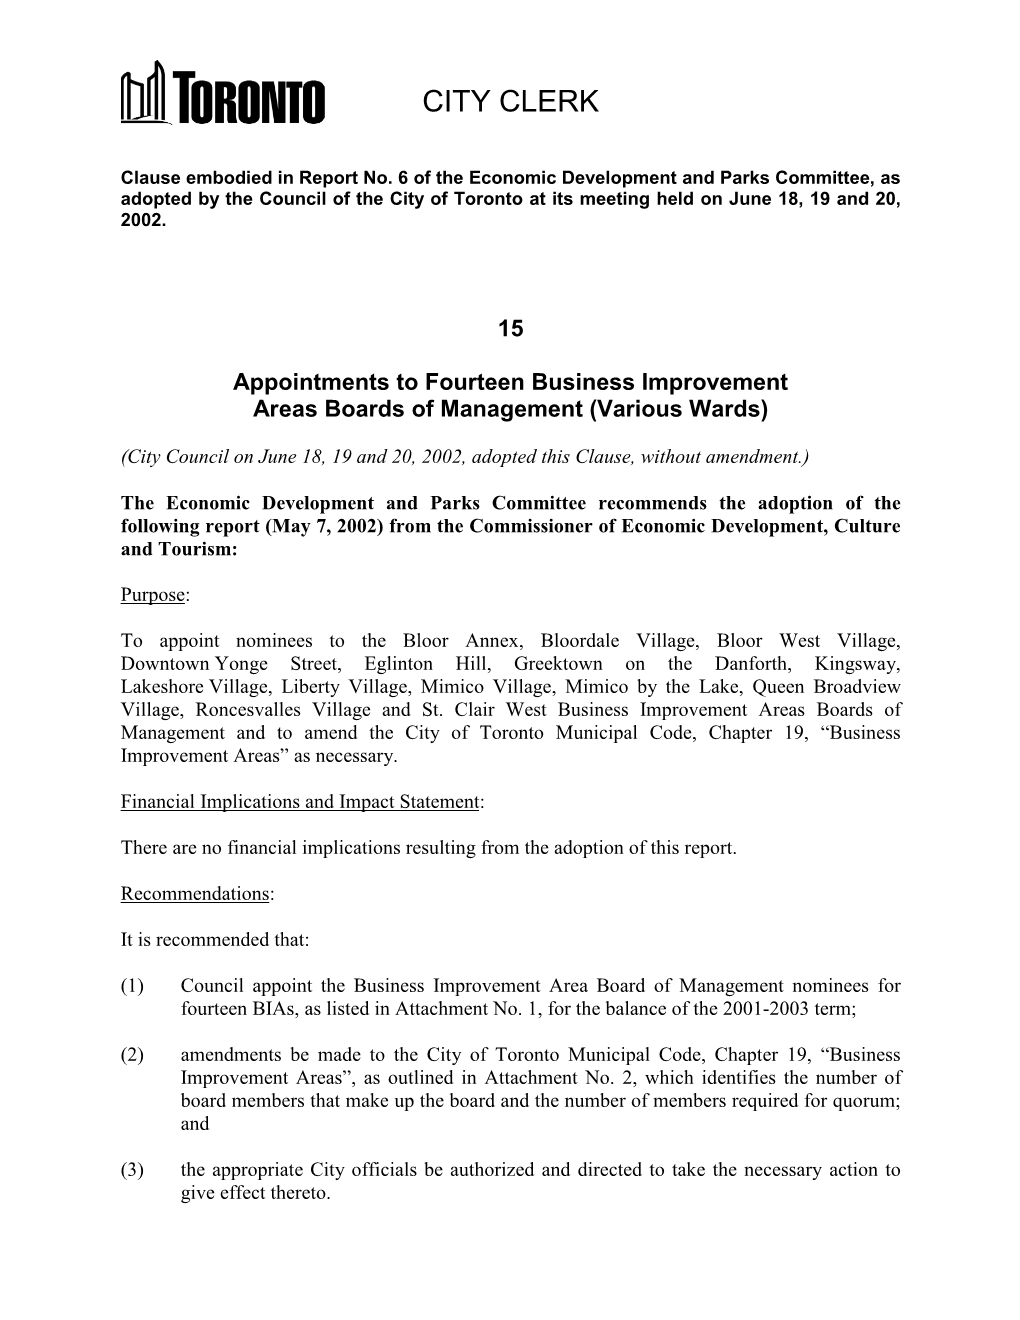 Appointments to Fourteen Business Improvement Areas Boards of Management (Various Wards)